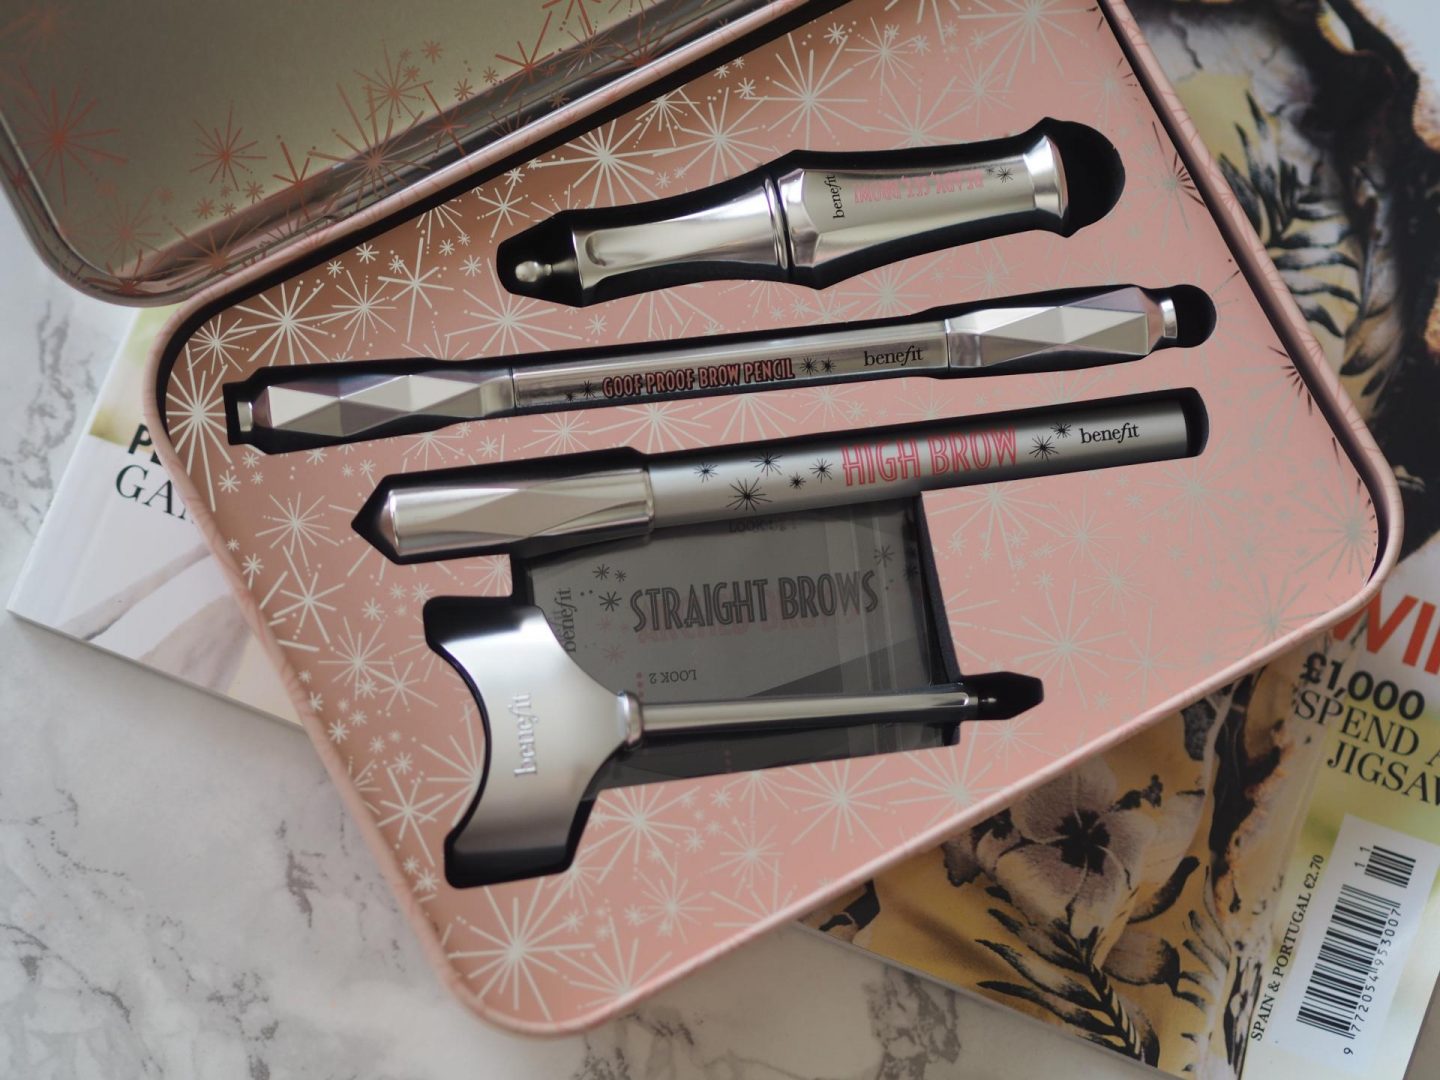 Winter Skincare - Product: Benefit Brows – Soft and Natural Brows Kit